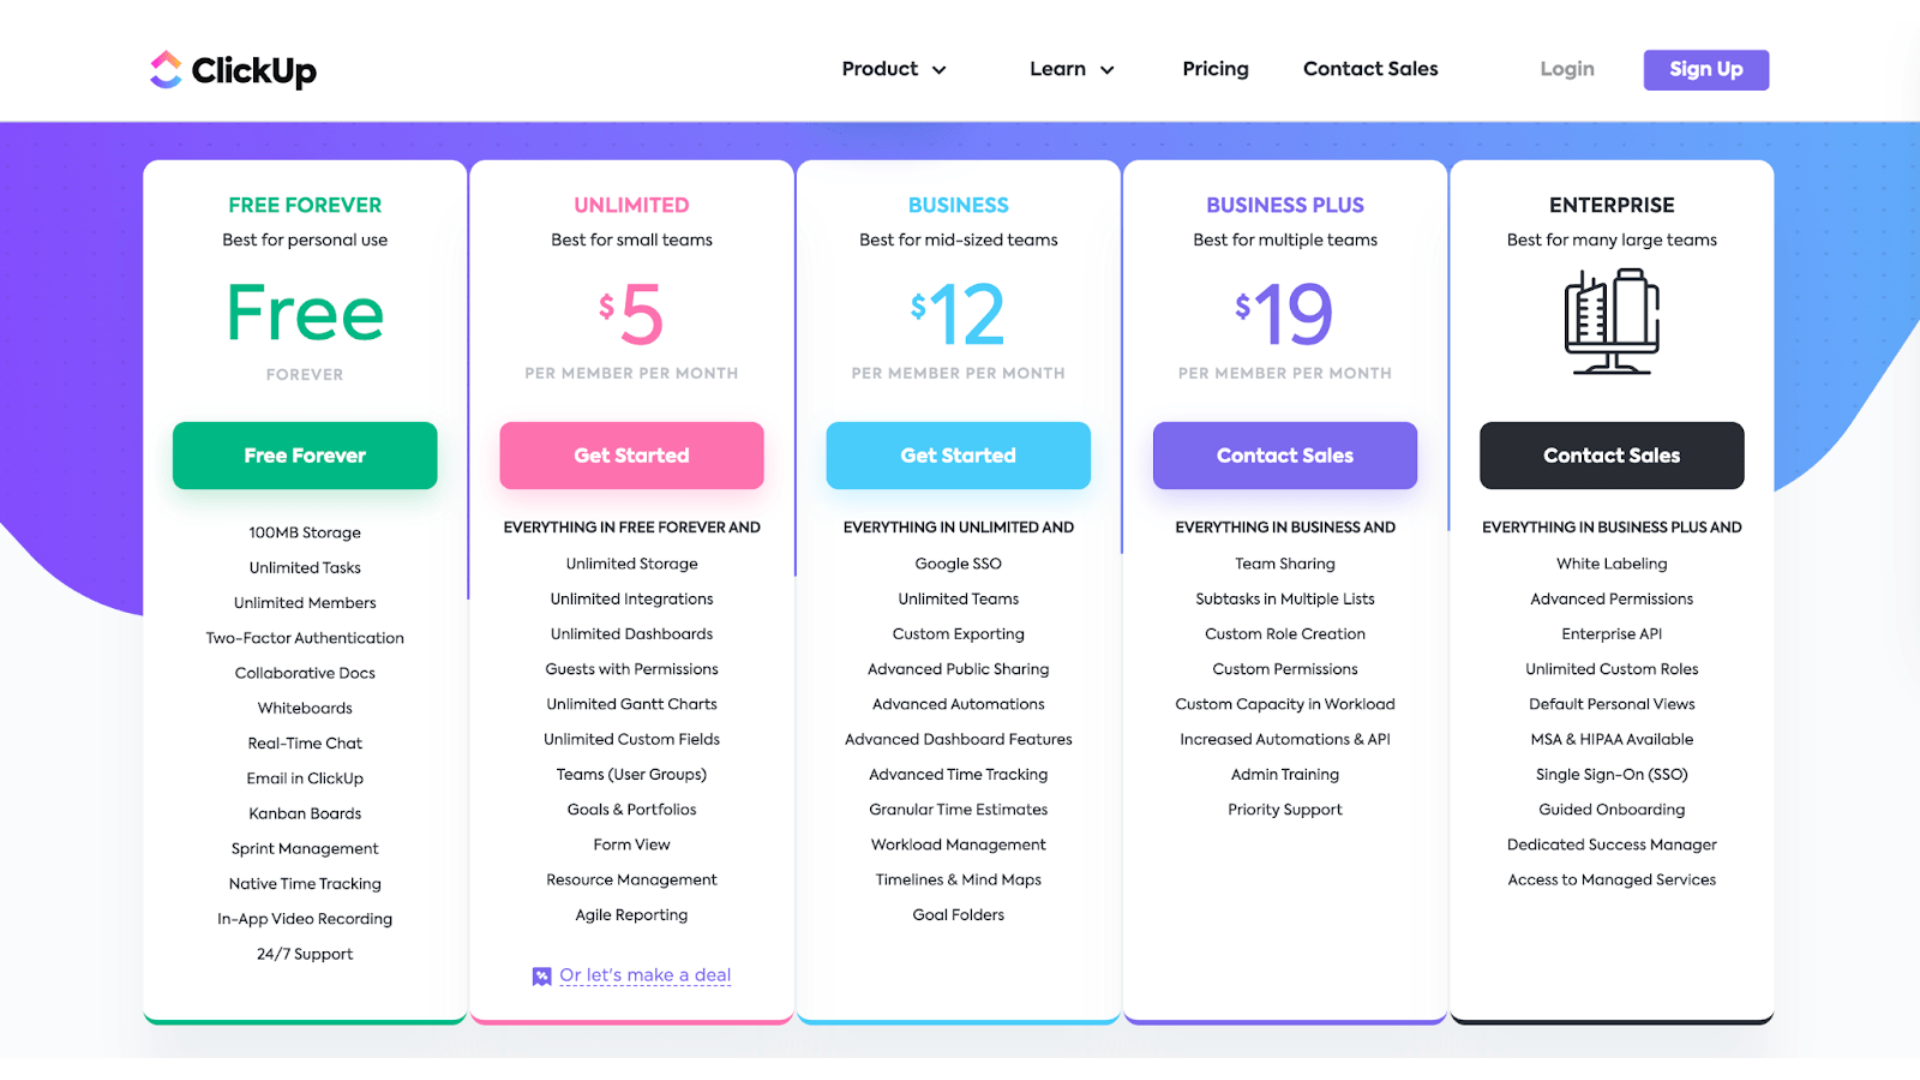 ClickUp's pricing plans